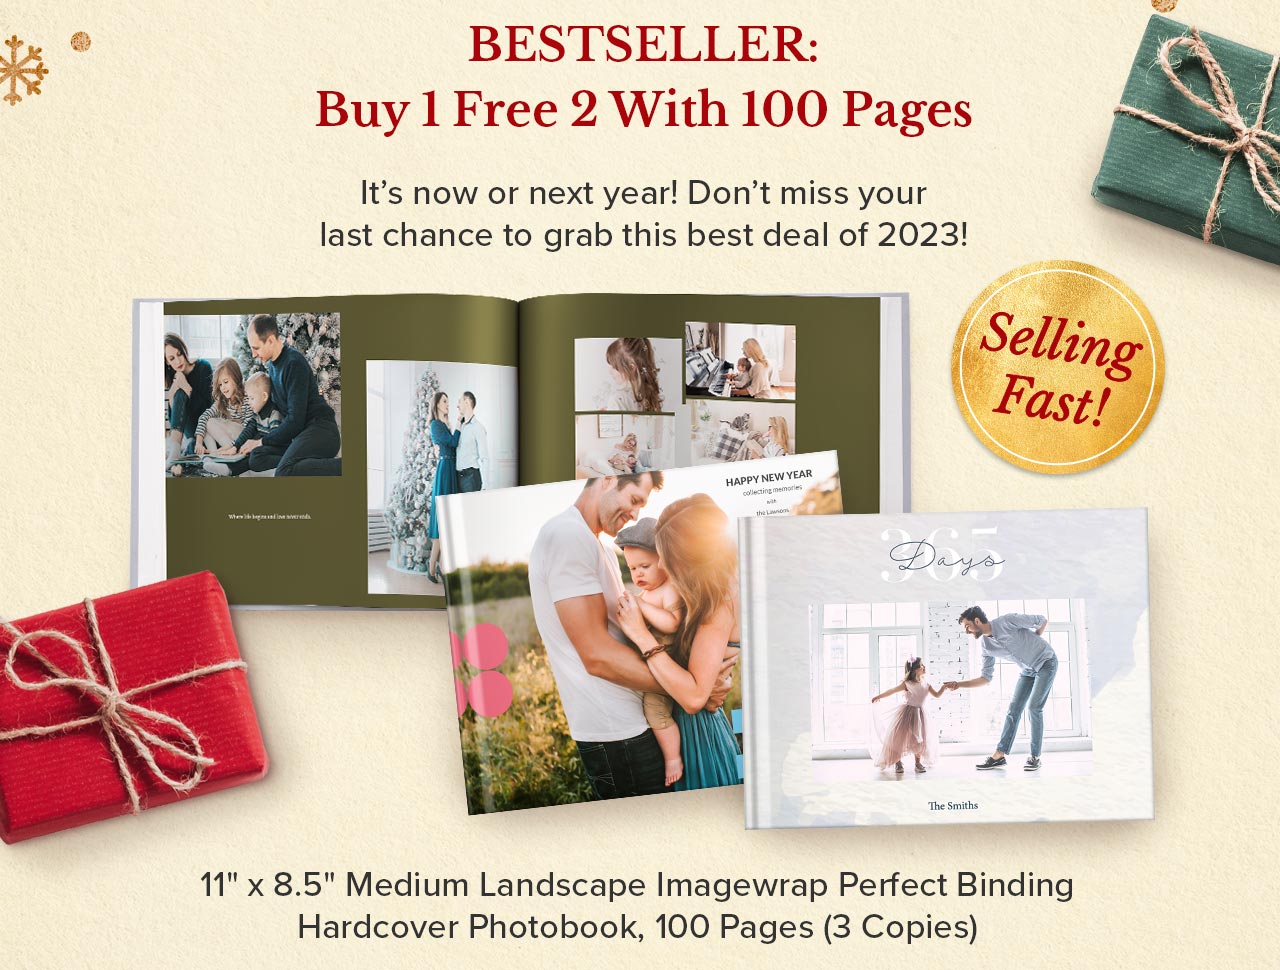 BESTSELLER | BUY 1 FREE 2 WITH 100 PAGES